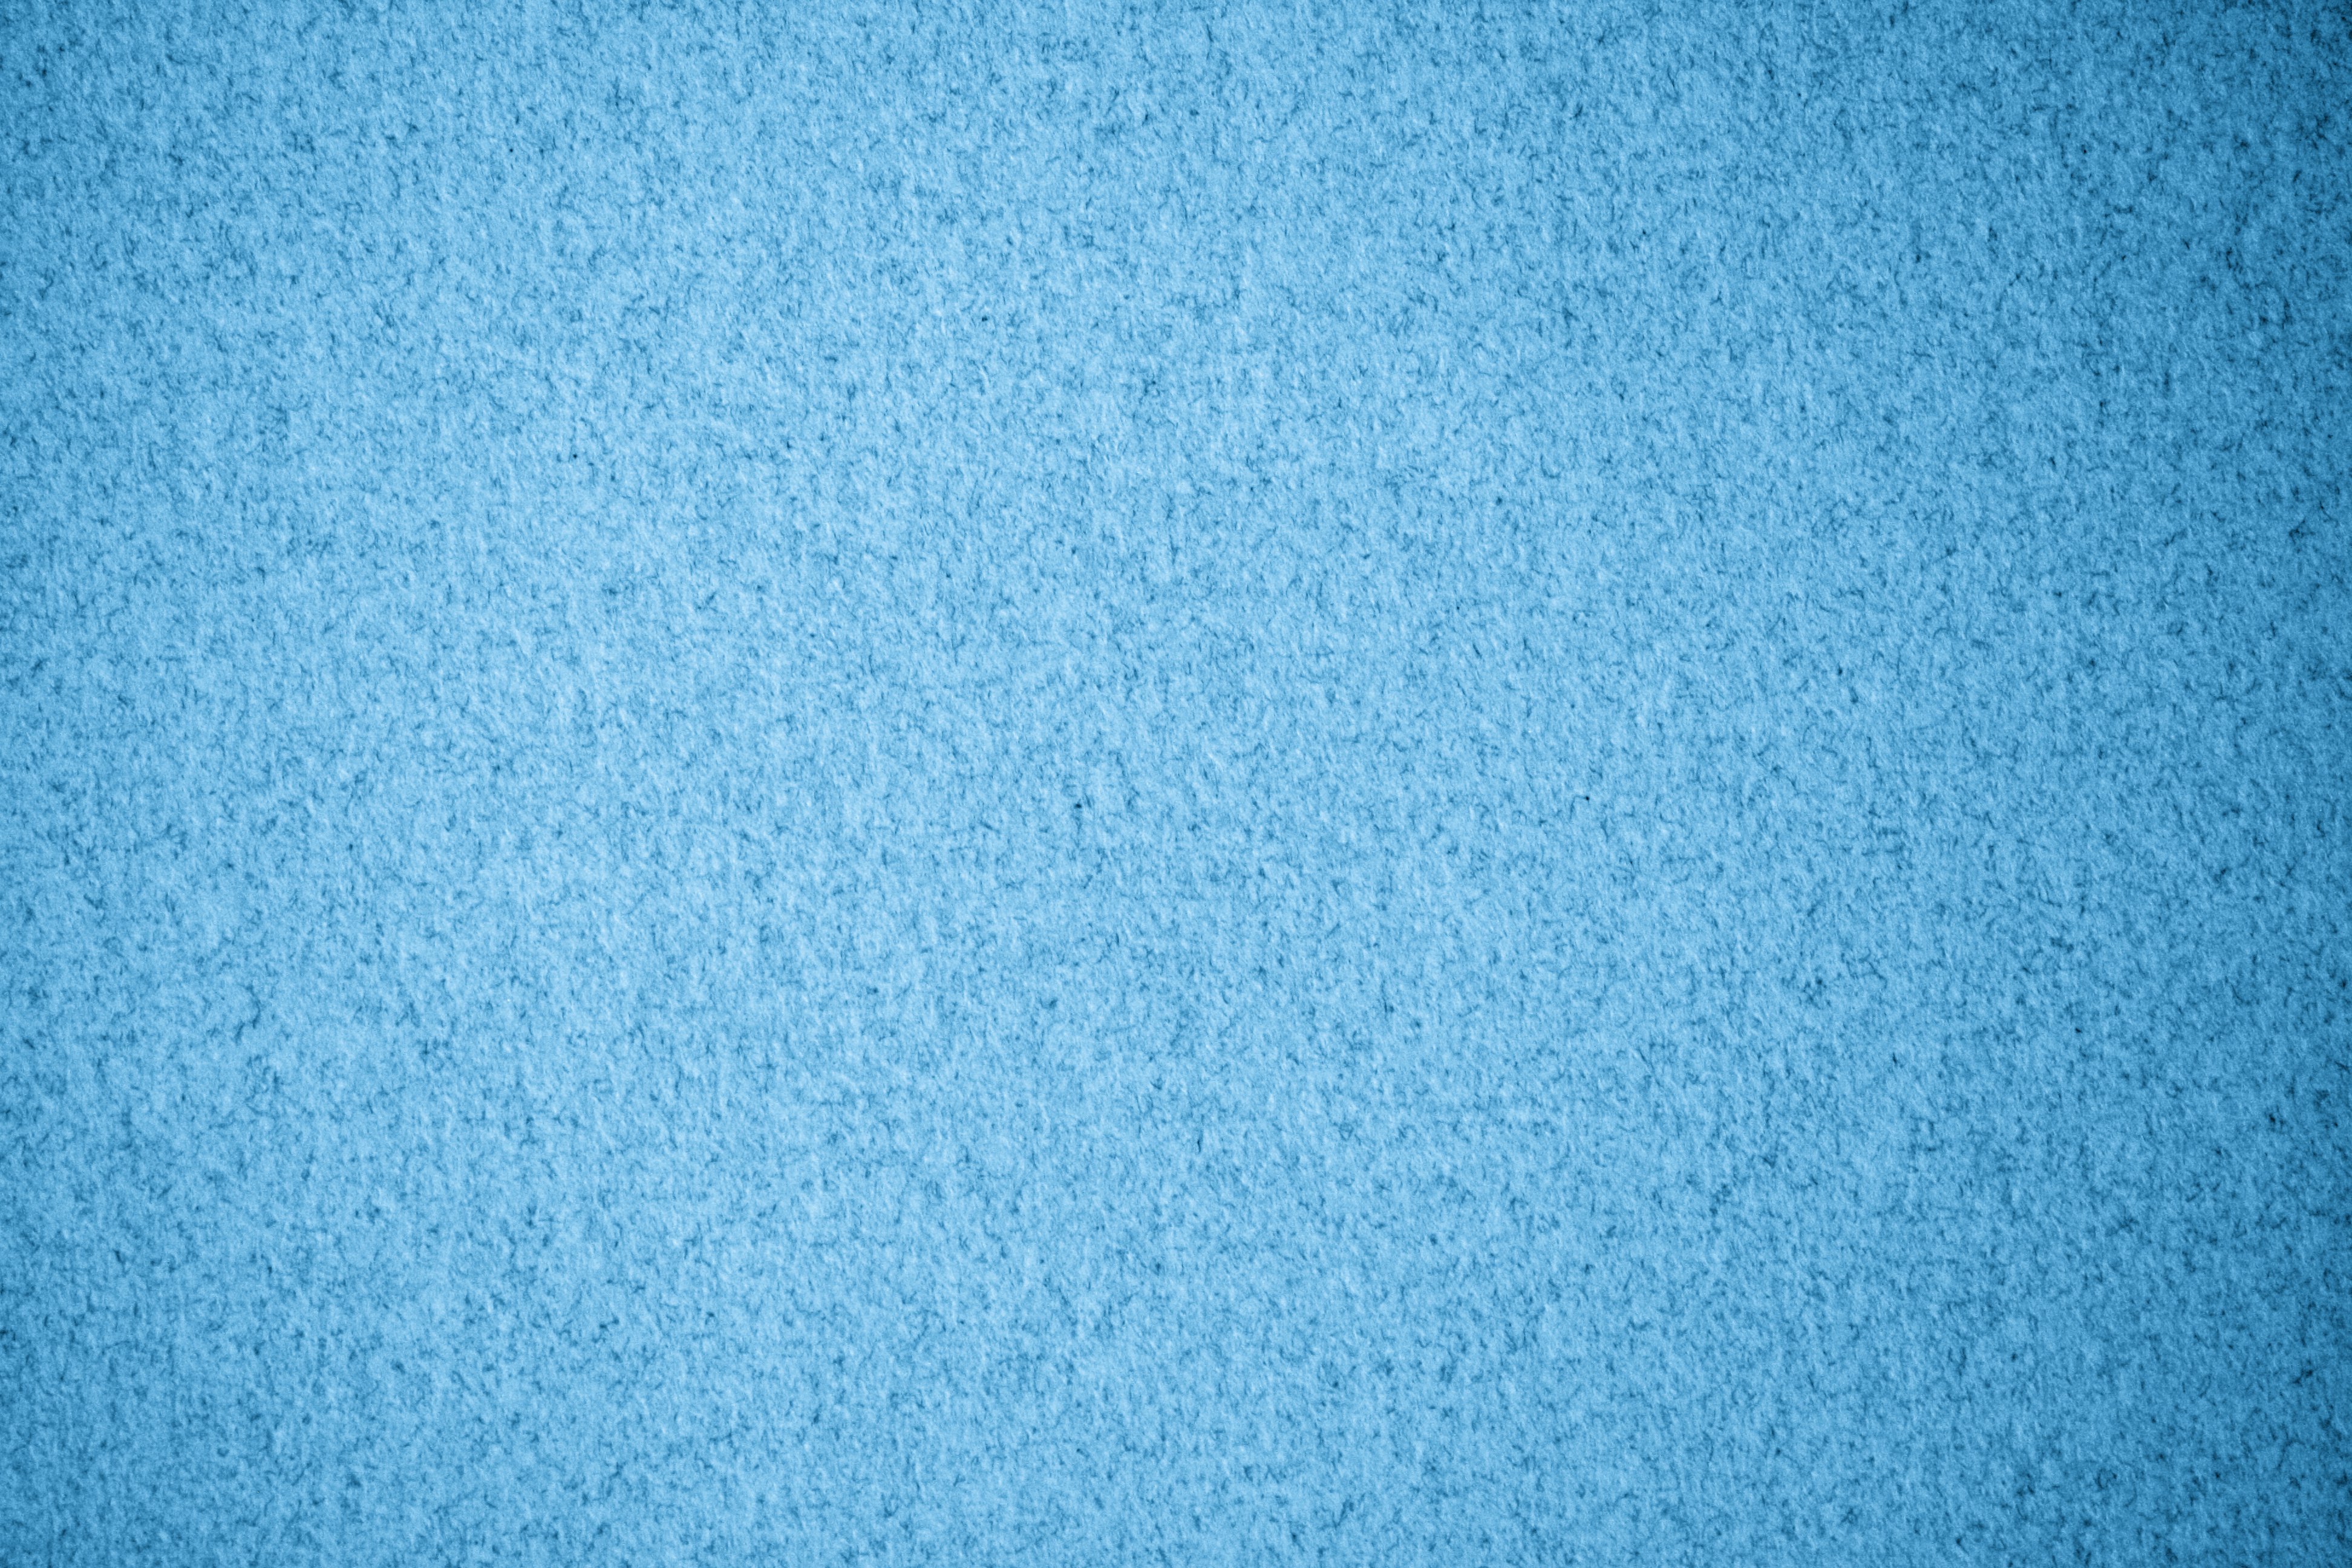 Sky Blue Speckled Paper Texture Picture Free Photograph Photos